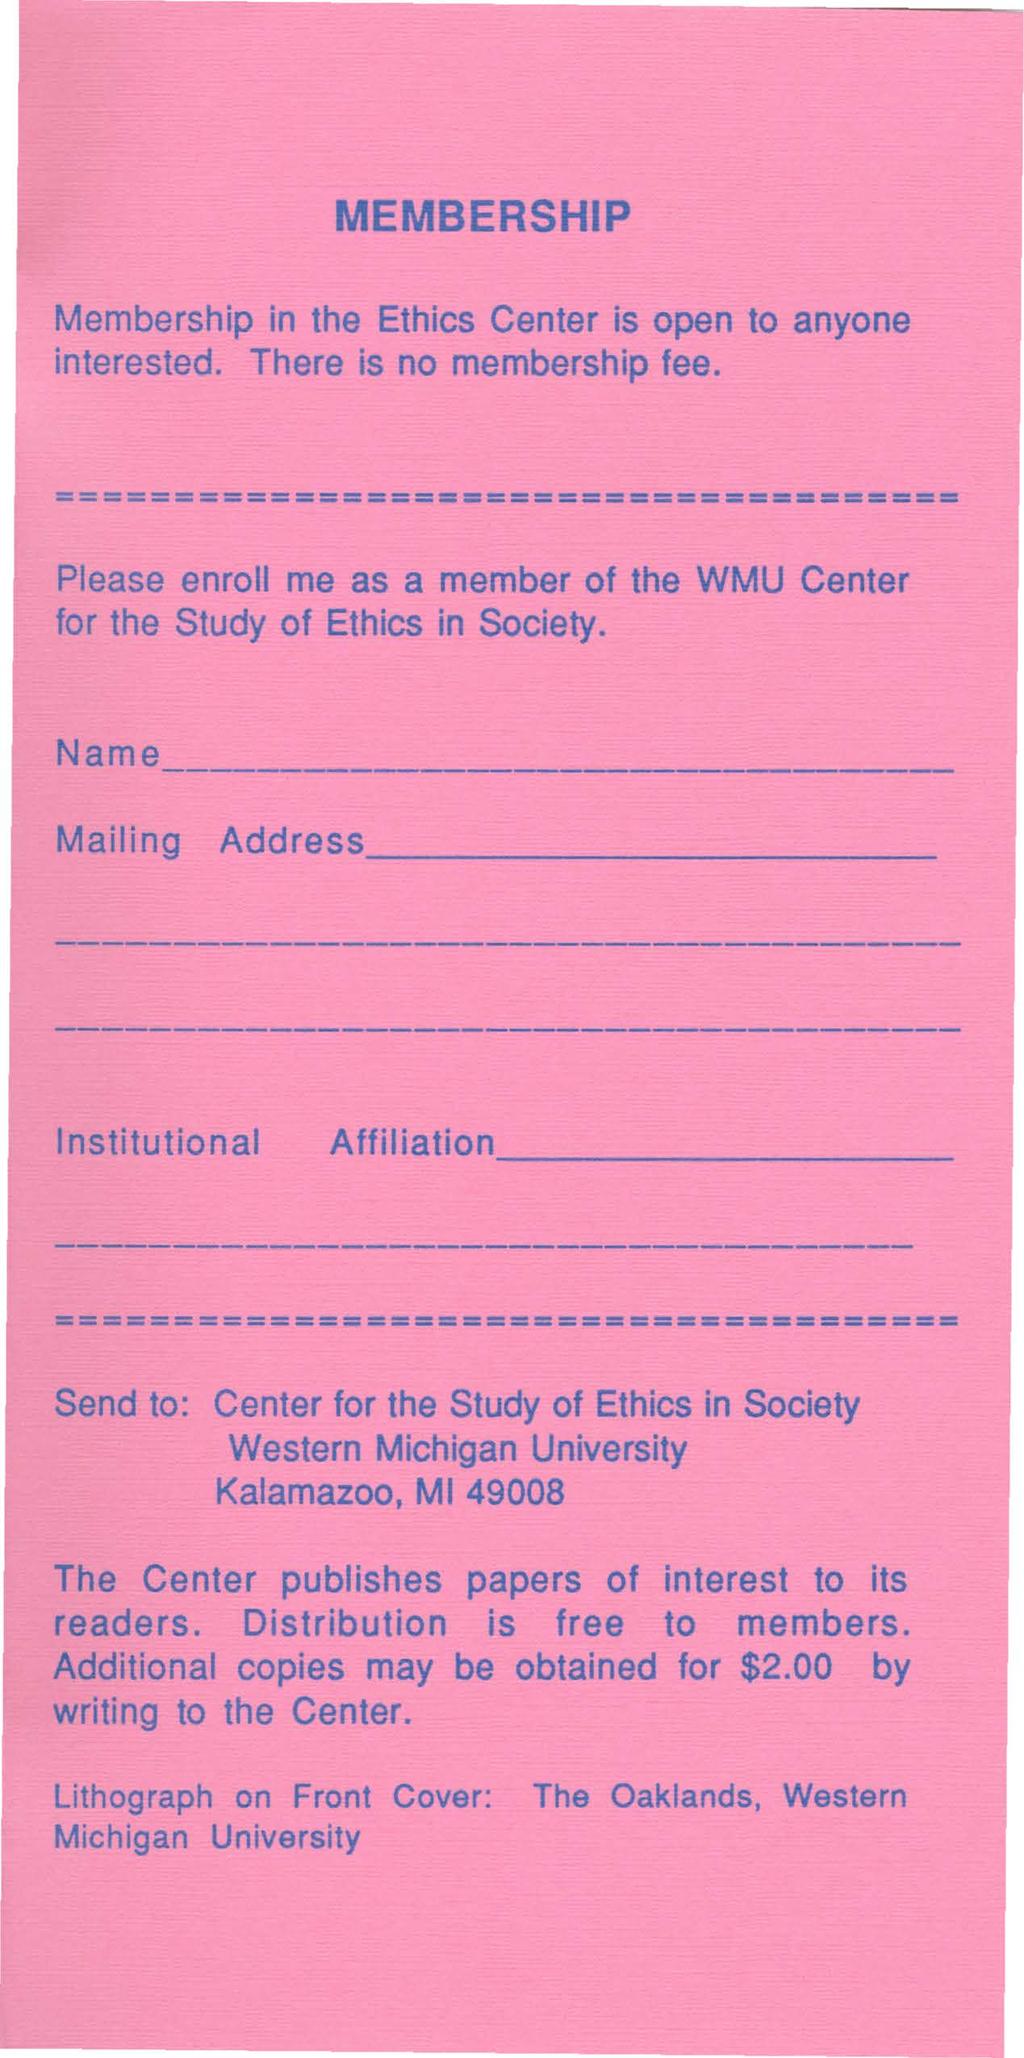 MEMBERSHIP Membership in the Ethics Center is open to anyone interested. There is no membership fee.